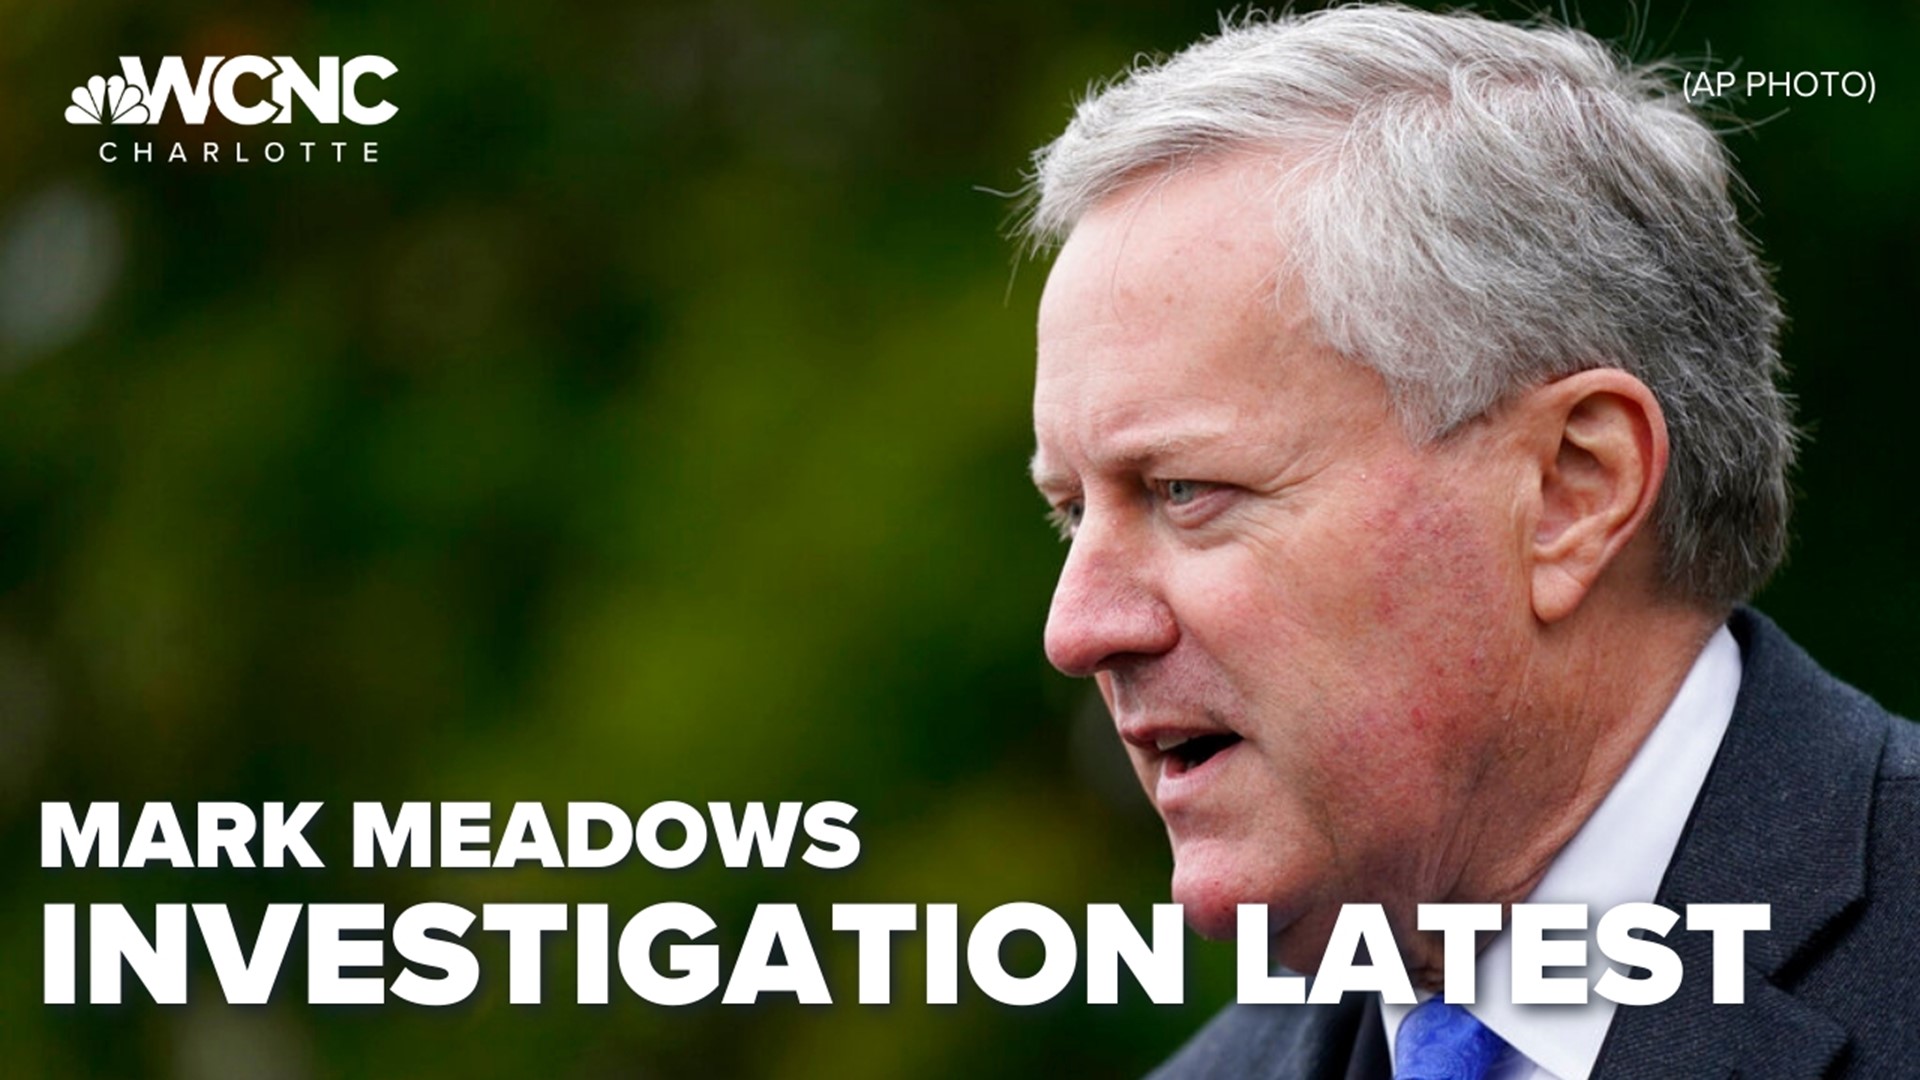 North Carolina state law enforcement submitted its findings in its investigation into former Congressman Mark Meadows.